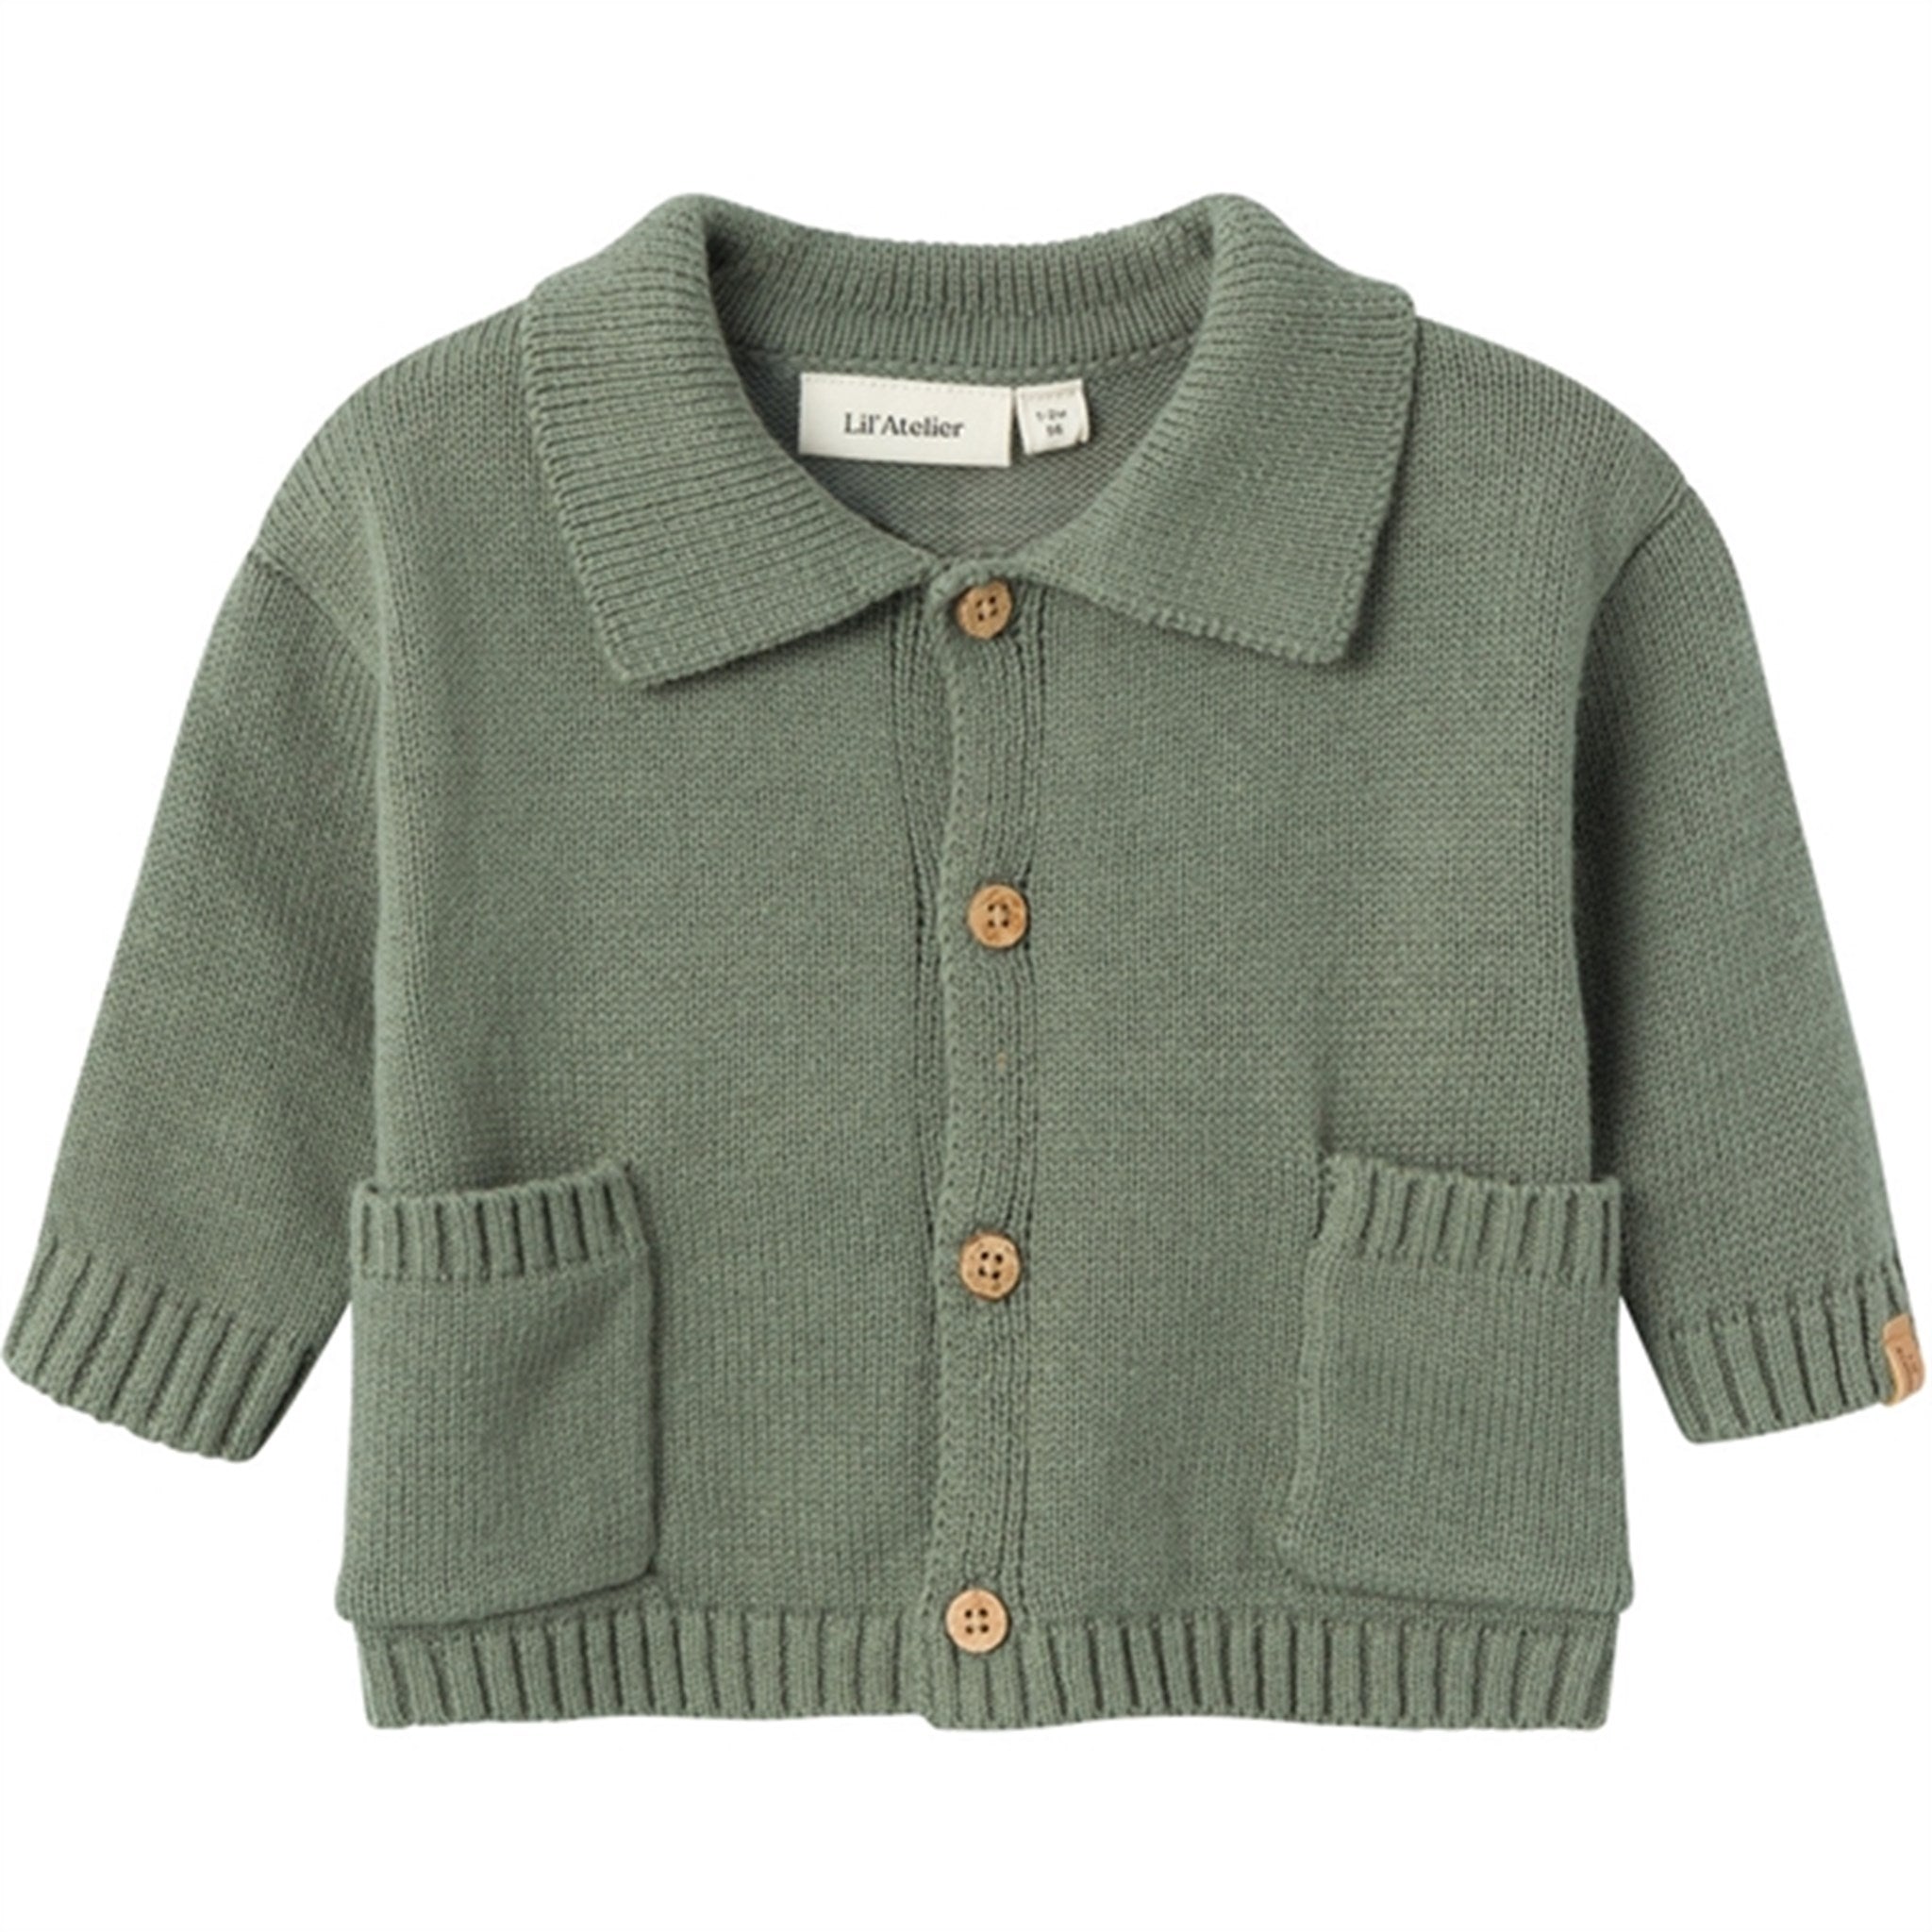 Lil'Atelier Agave Green Theo Loose Knit Cardigan